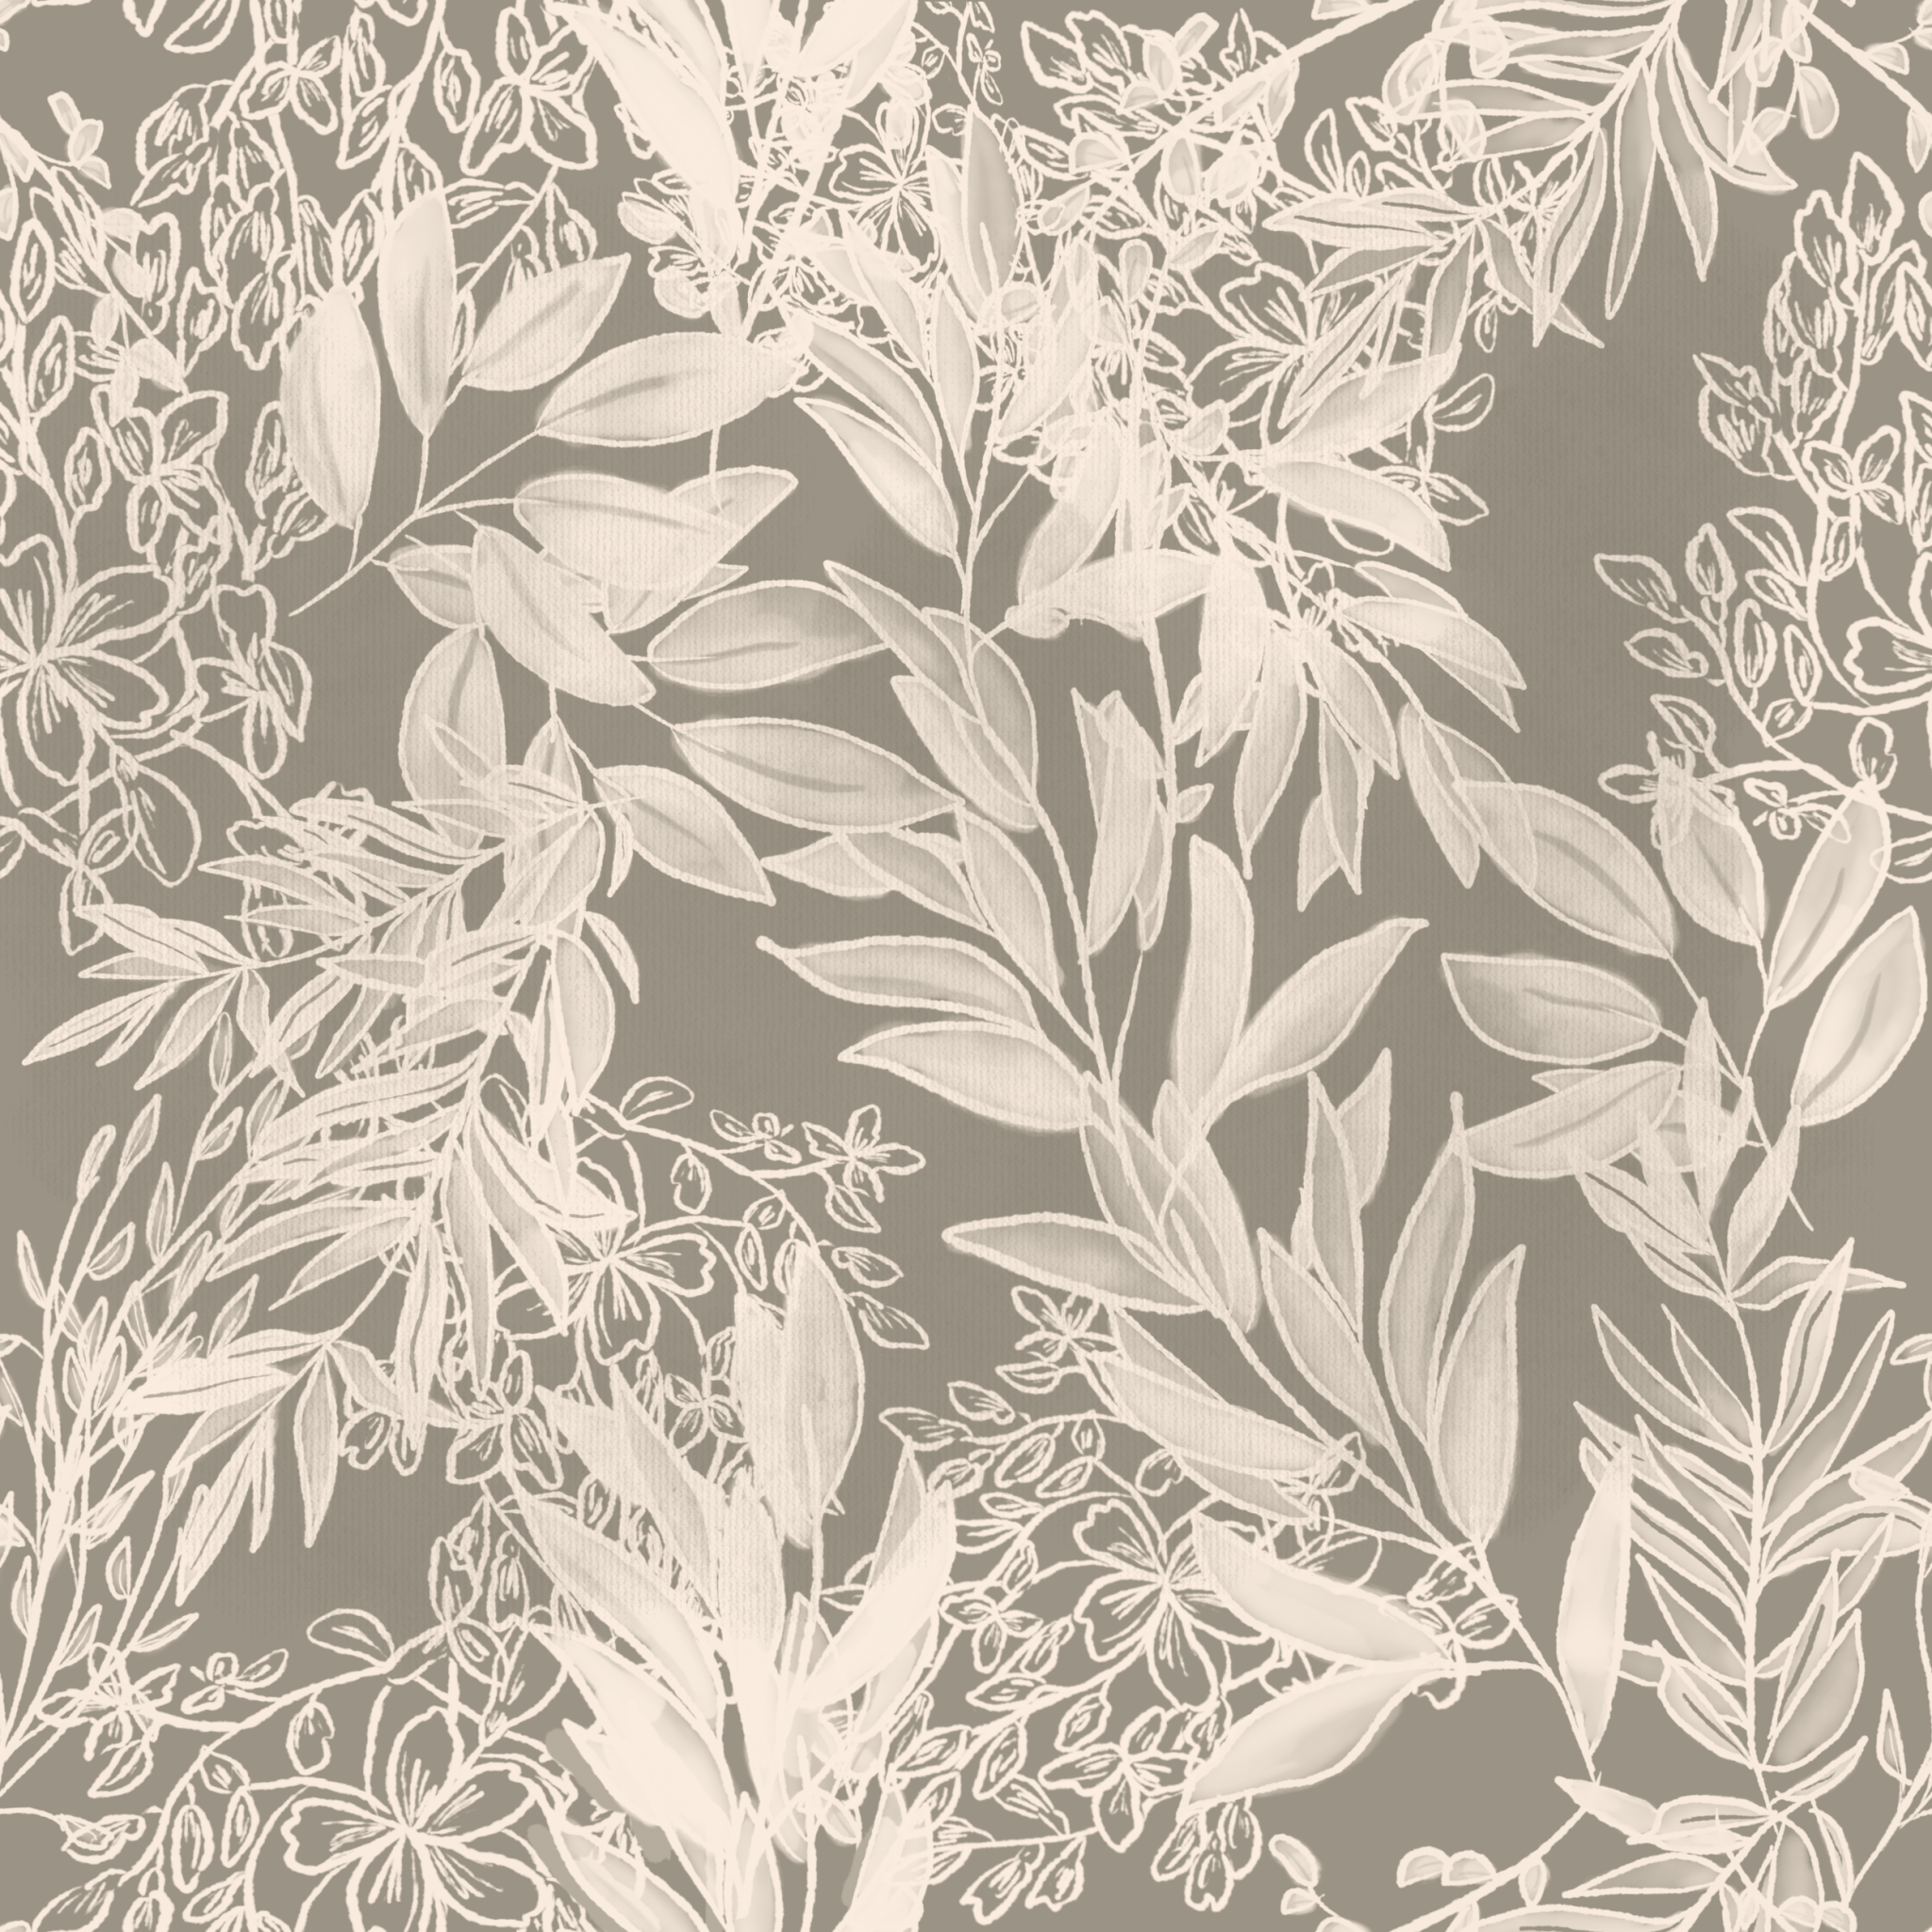 A monochromatic image displaying a close-up of a wallpaper with a leafy pattern in shades of light and dark gray on a cream background